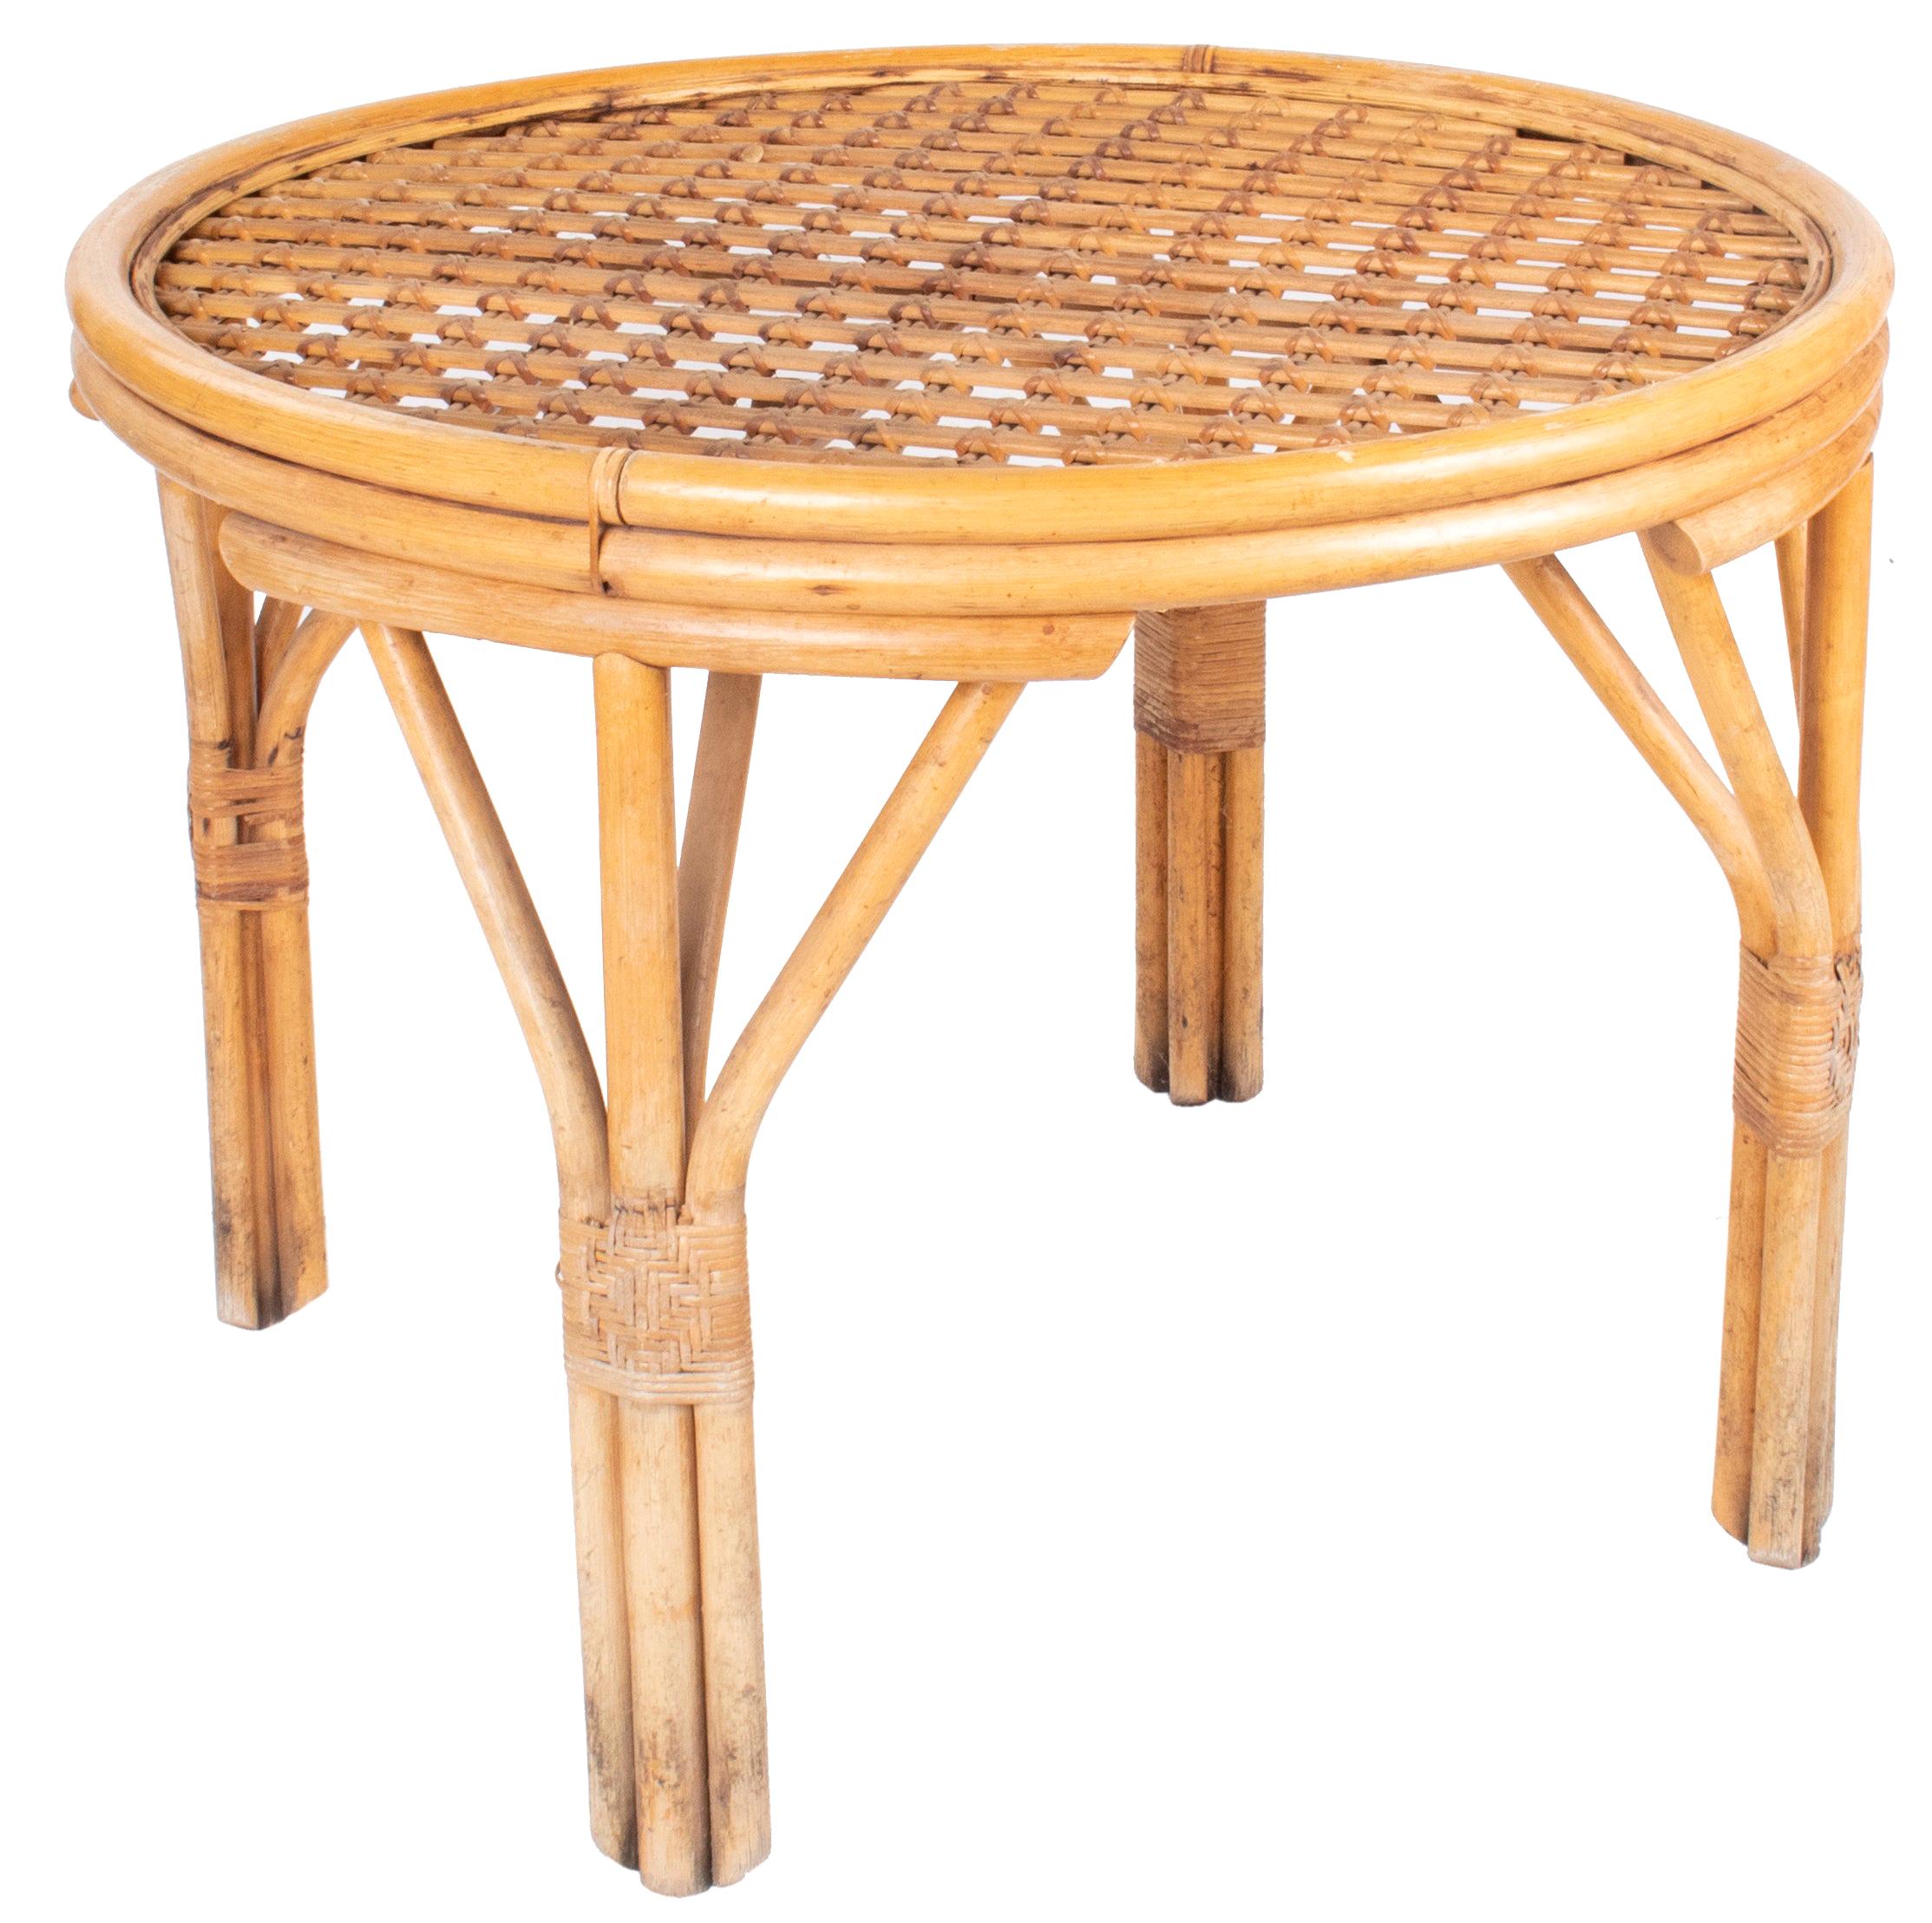 1980s Spanish Bamboo and Wicker Round Table